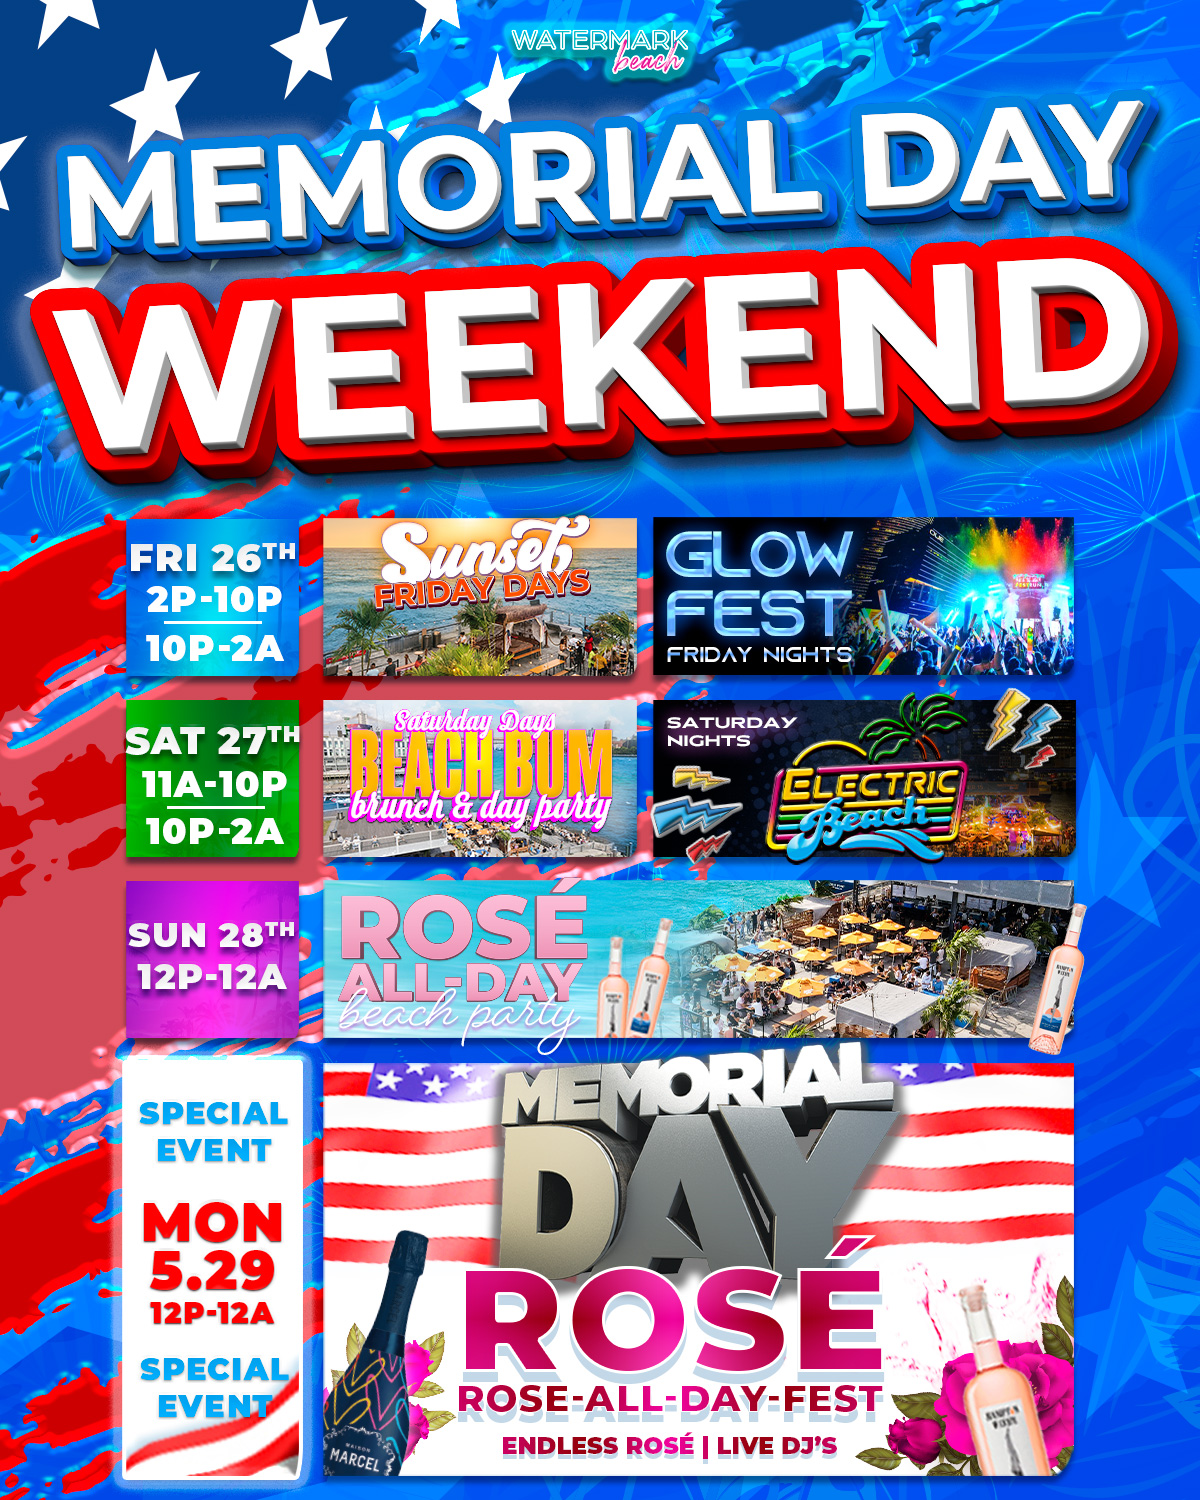 Memorial Day Weekend at Watermark Monday, May 29, 2023 1200pm New